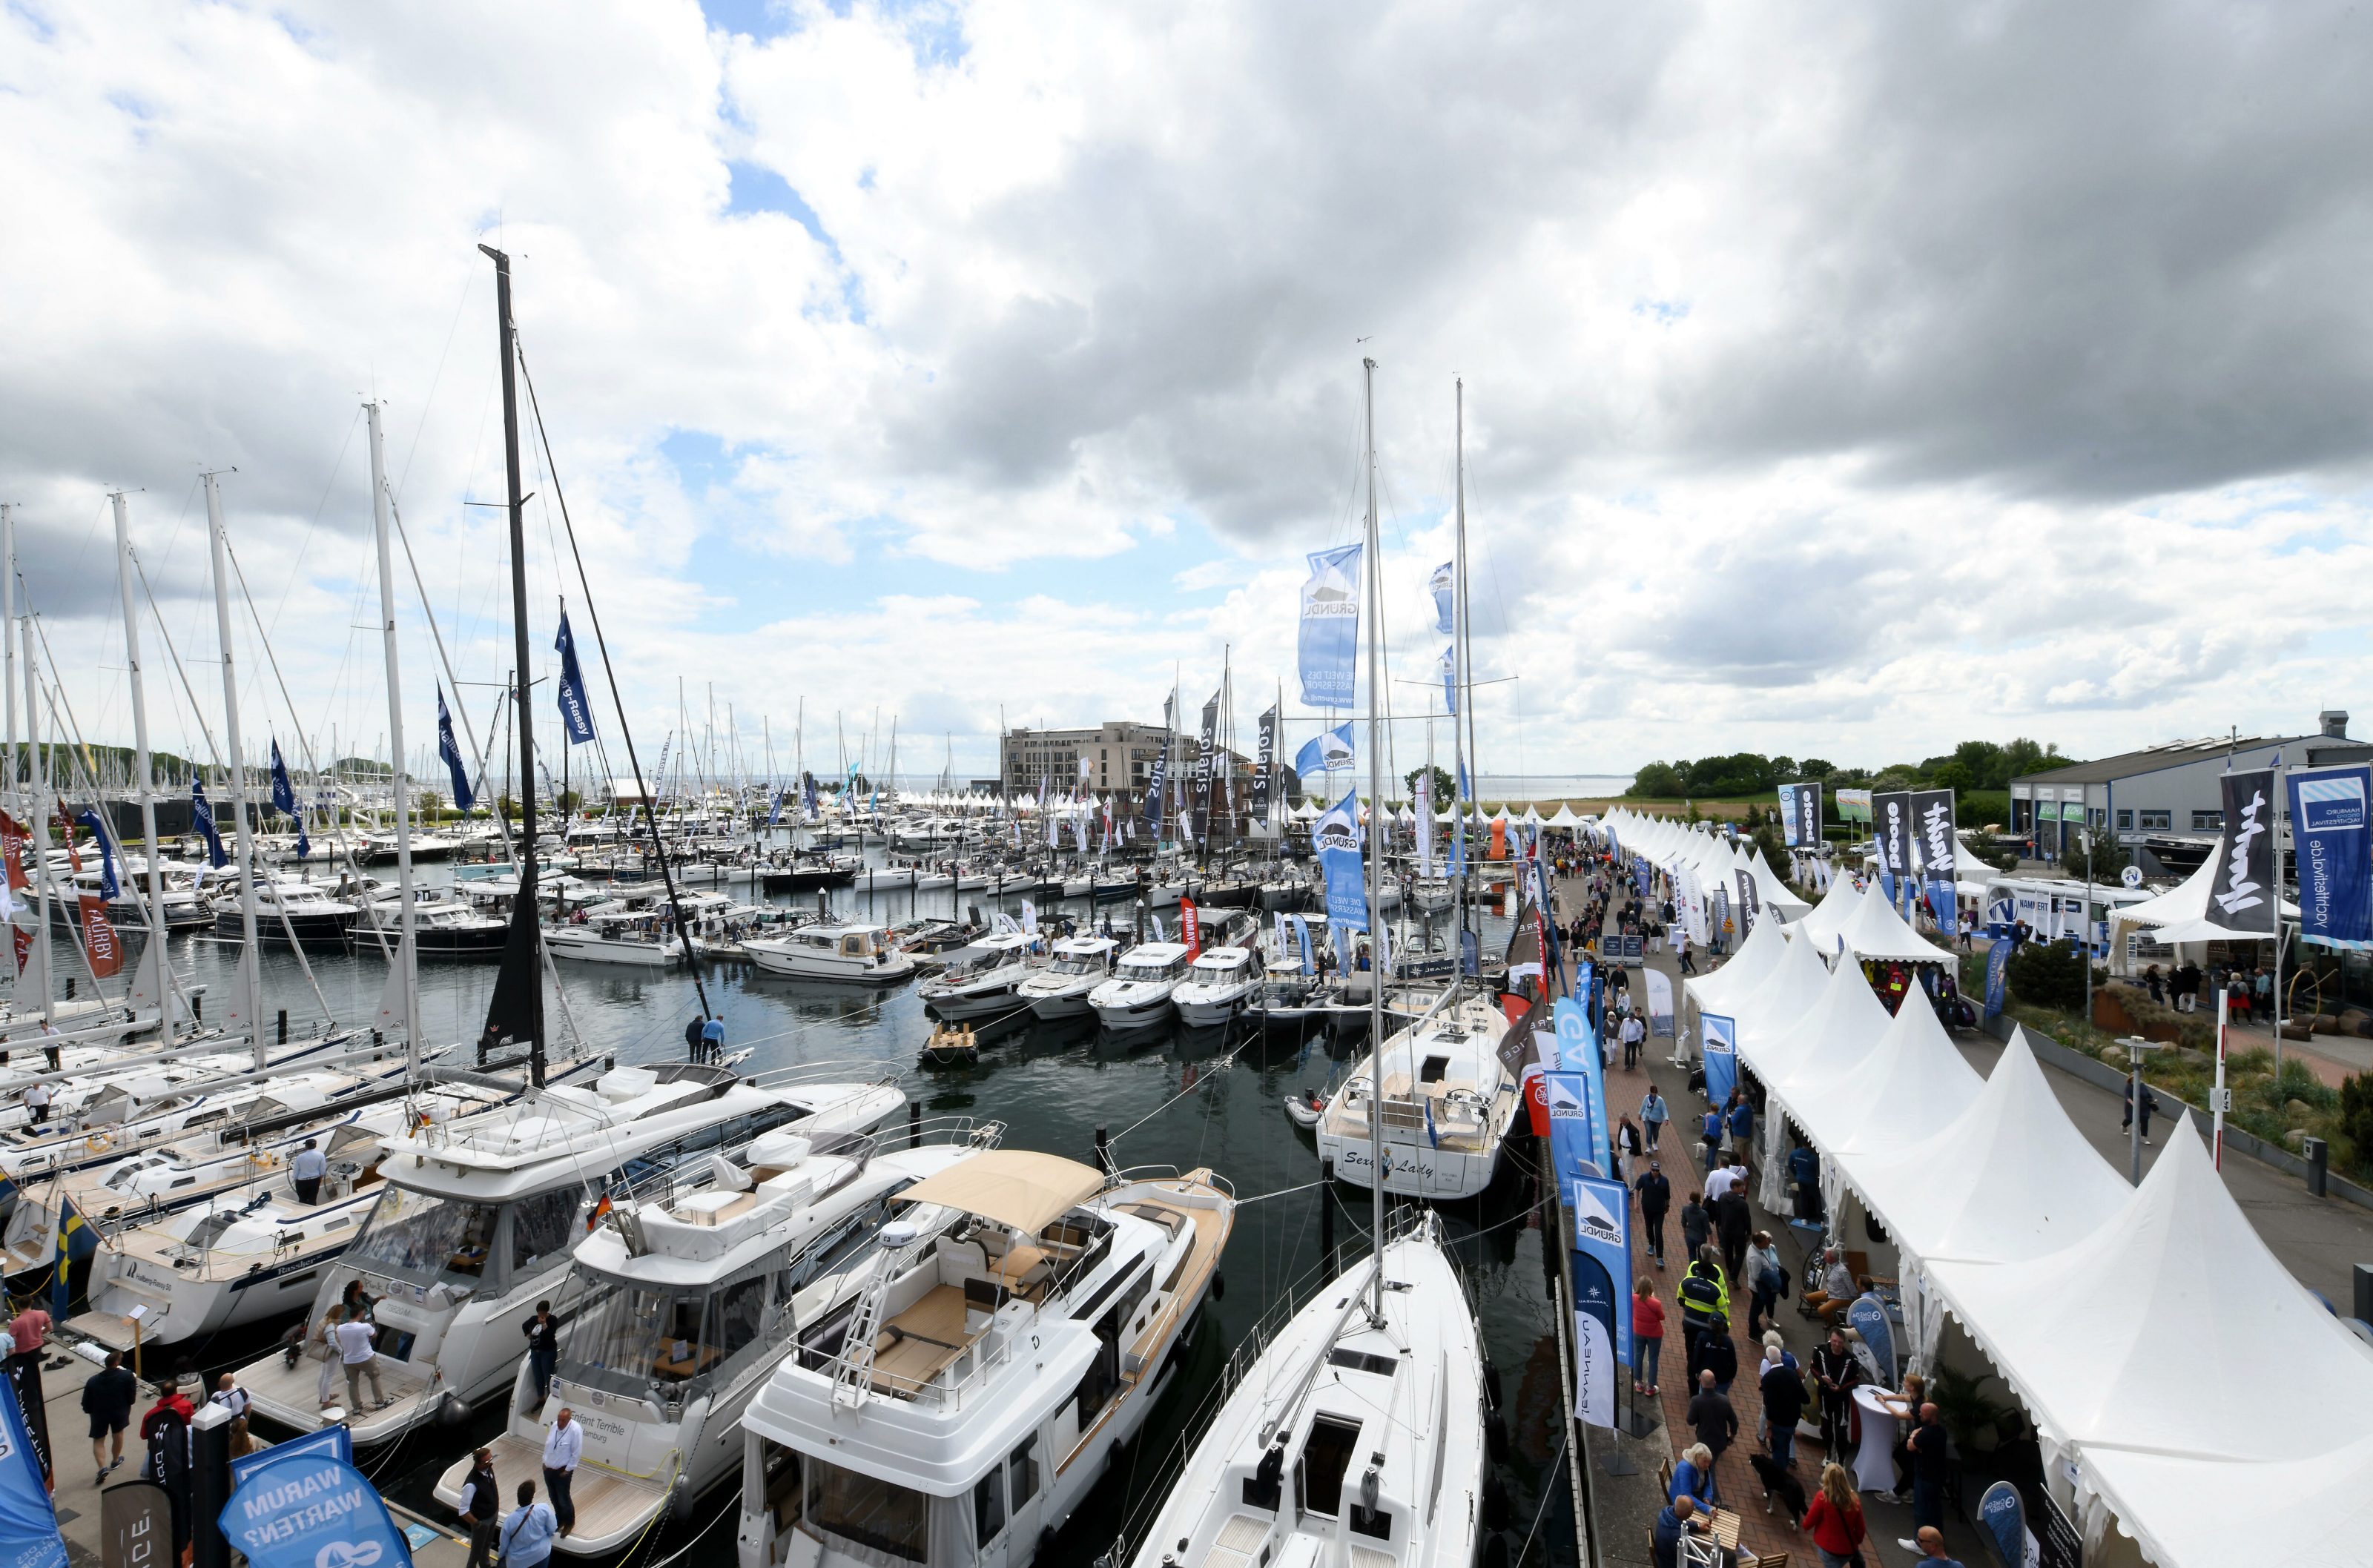 yachtfestival boat show